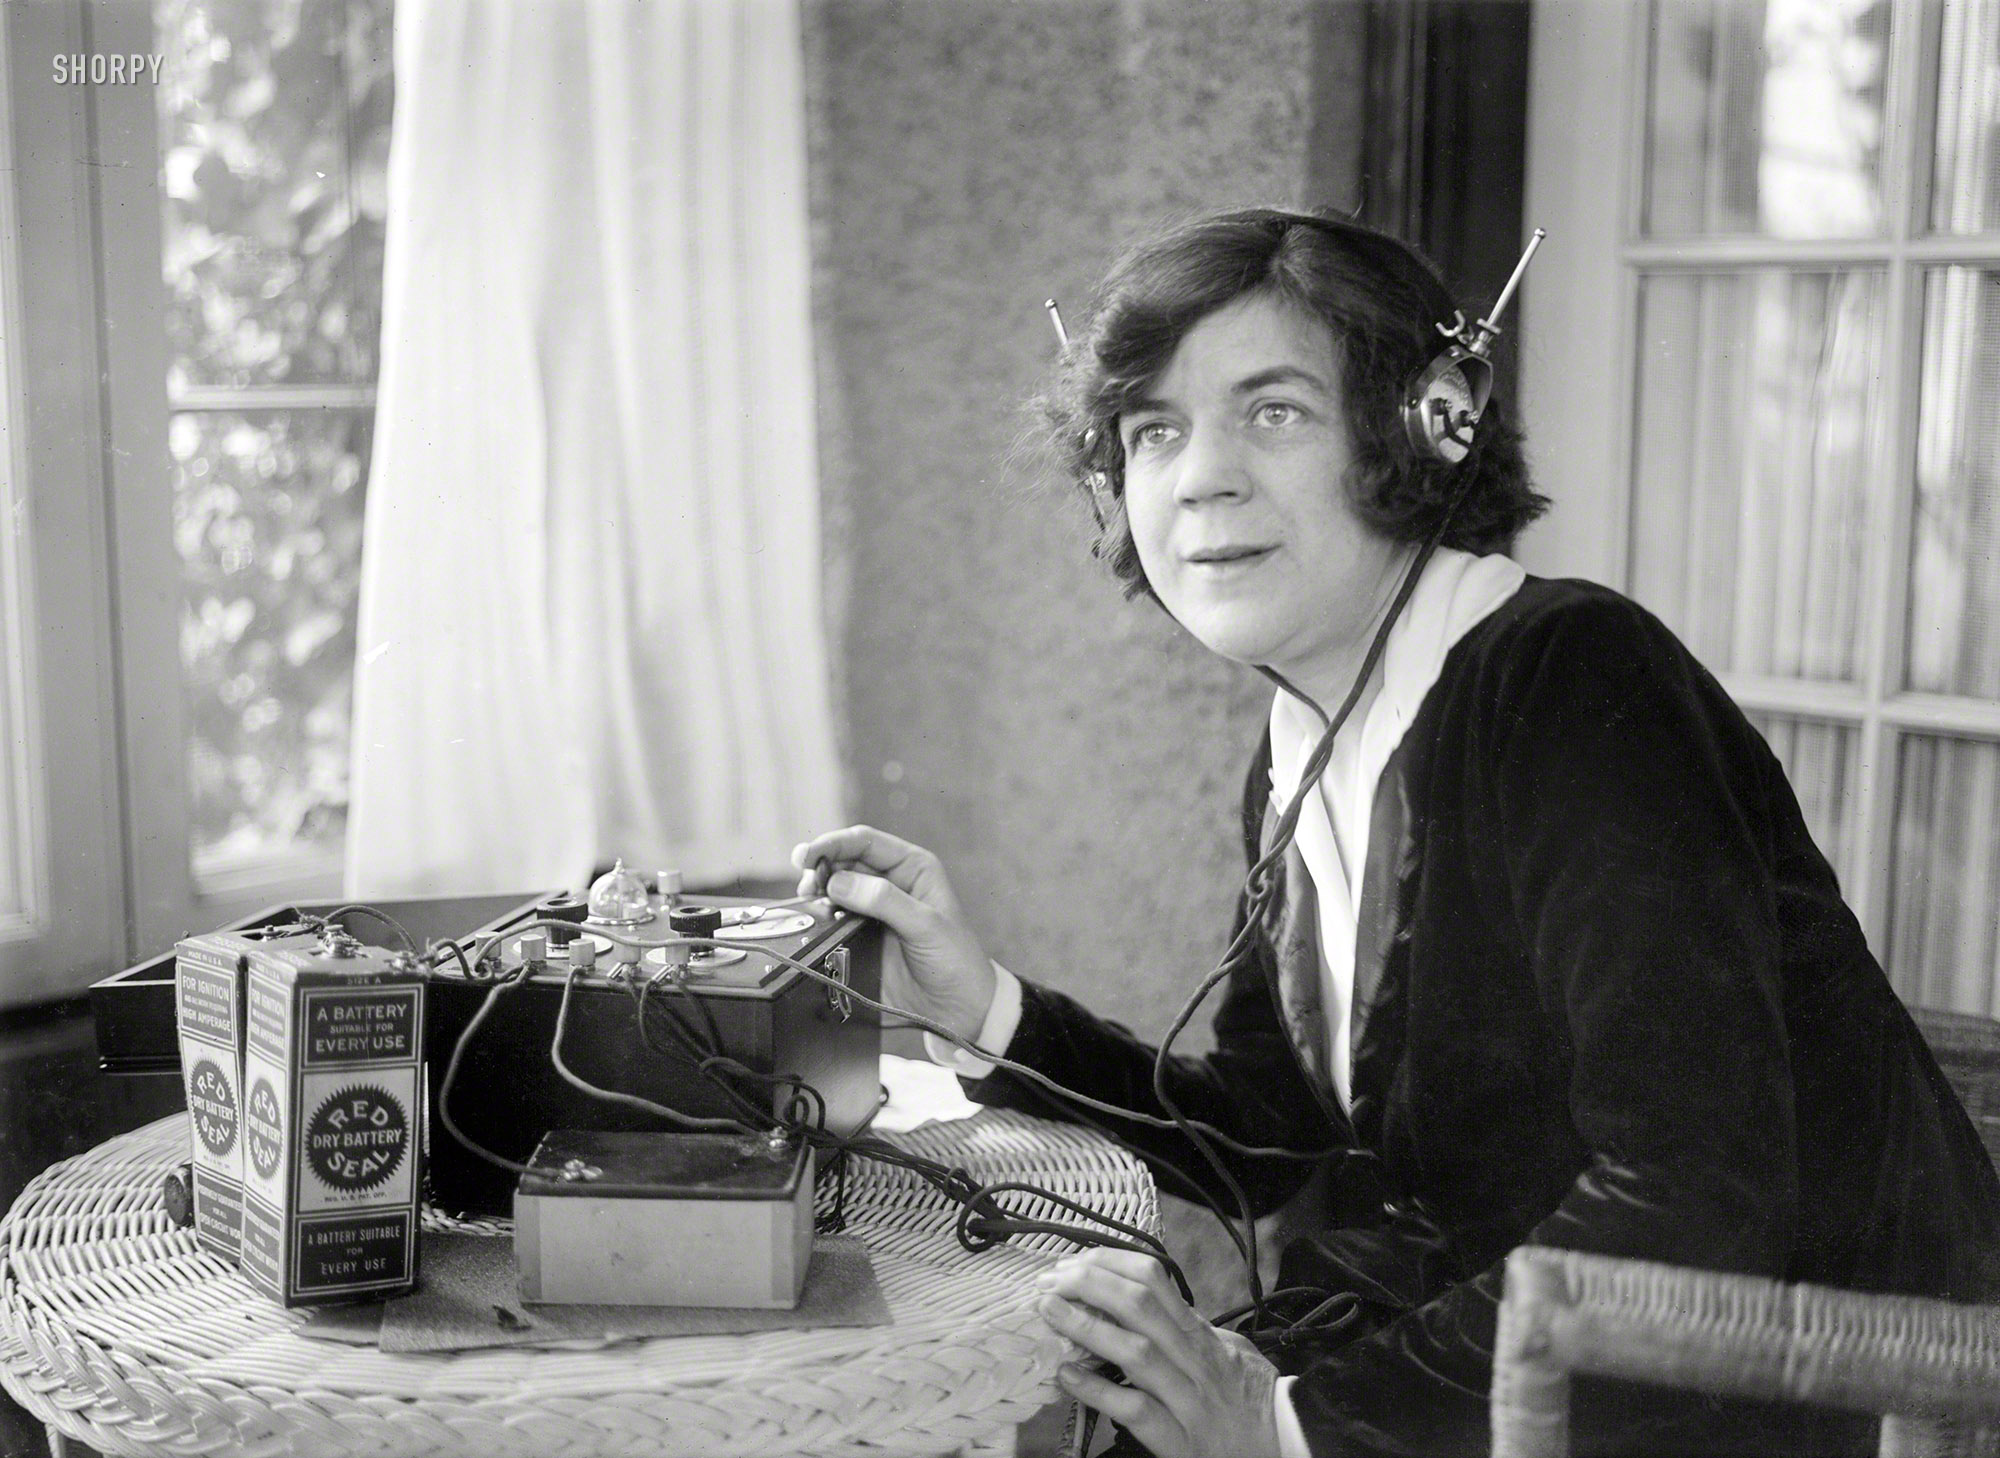 Circa 1921 in New York, the British pianist and conductor Ethel Leginska, last seen here. 5x7 glass negative, George Grantham Bain Collection. View full size.